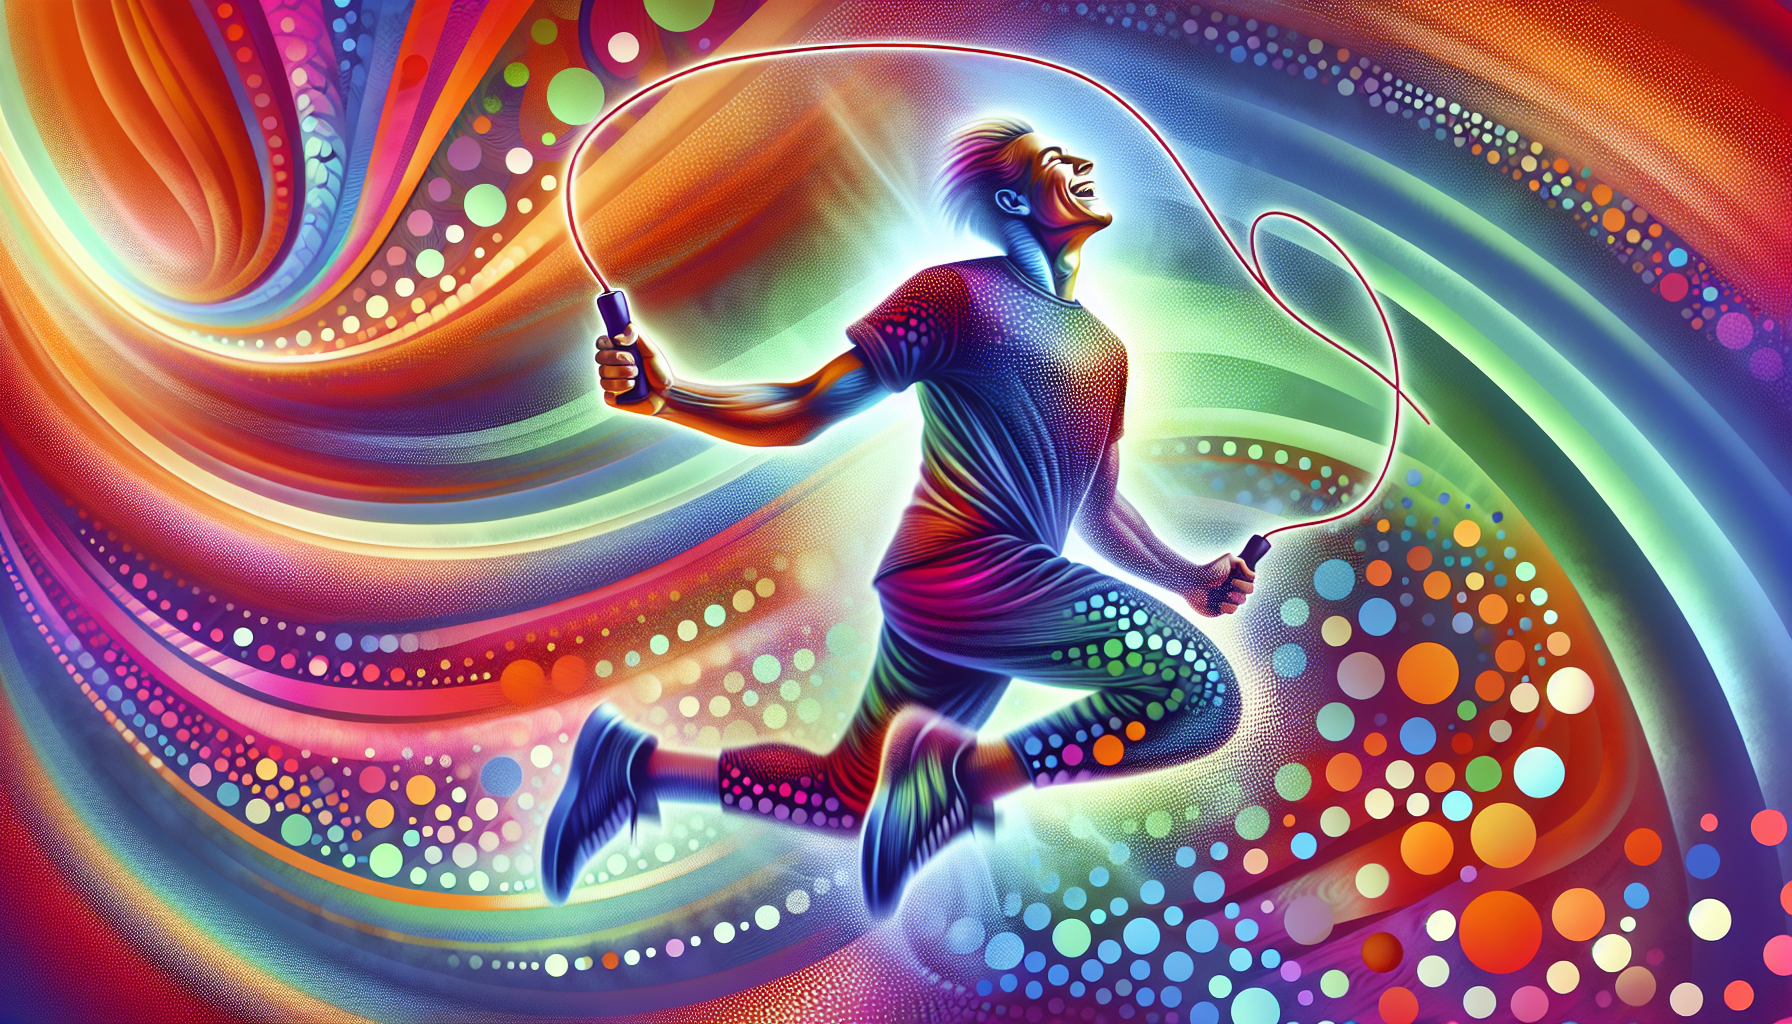 Illustration of a person joyfully jumping rope with colorful background